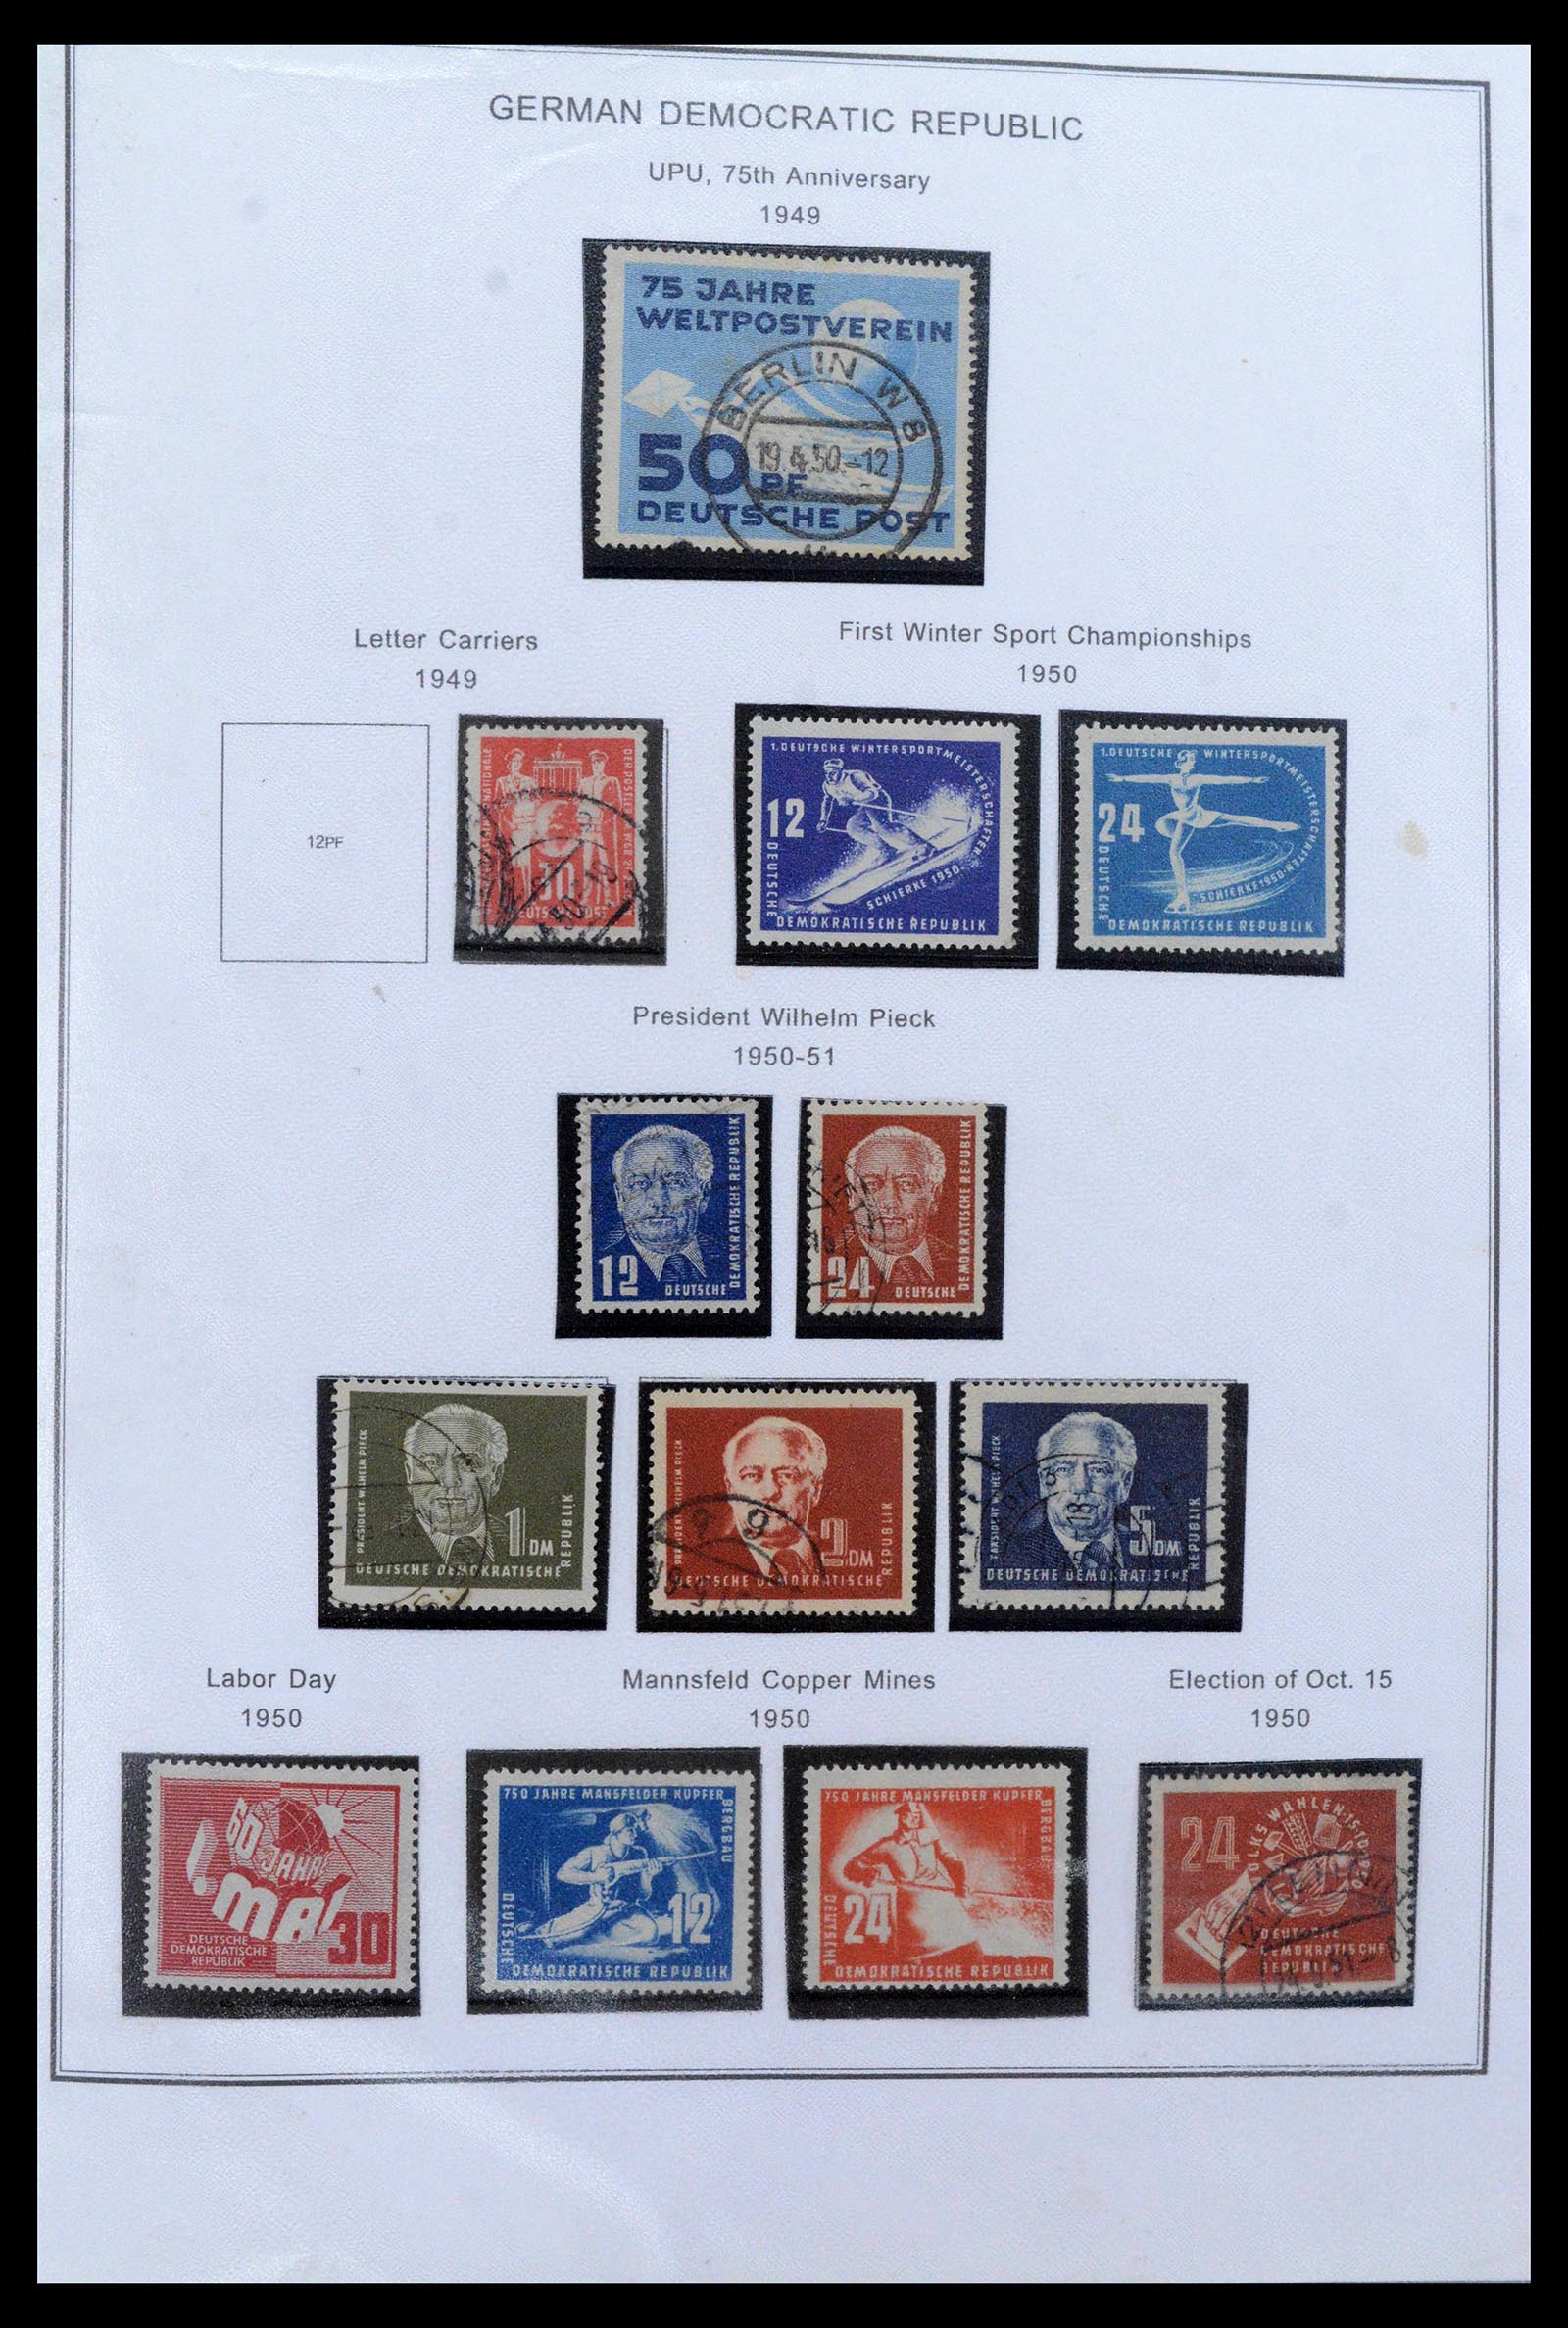 39351 0001 - Stamp collection 39351 GDR 1949-1990.